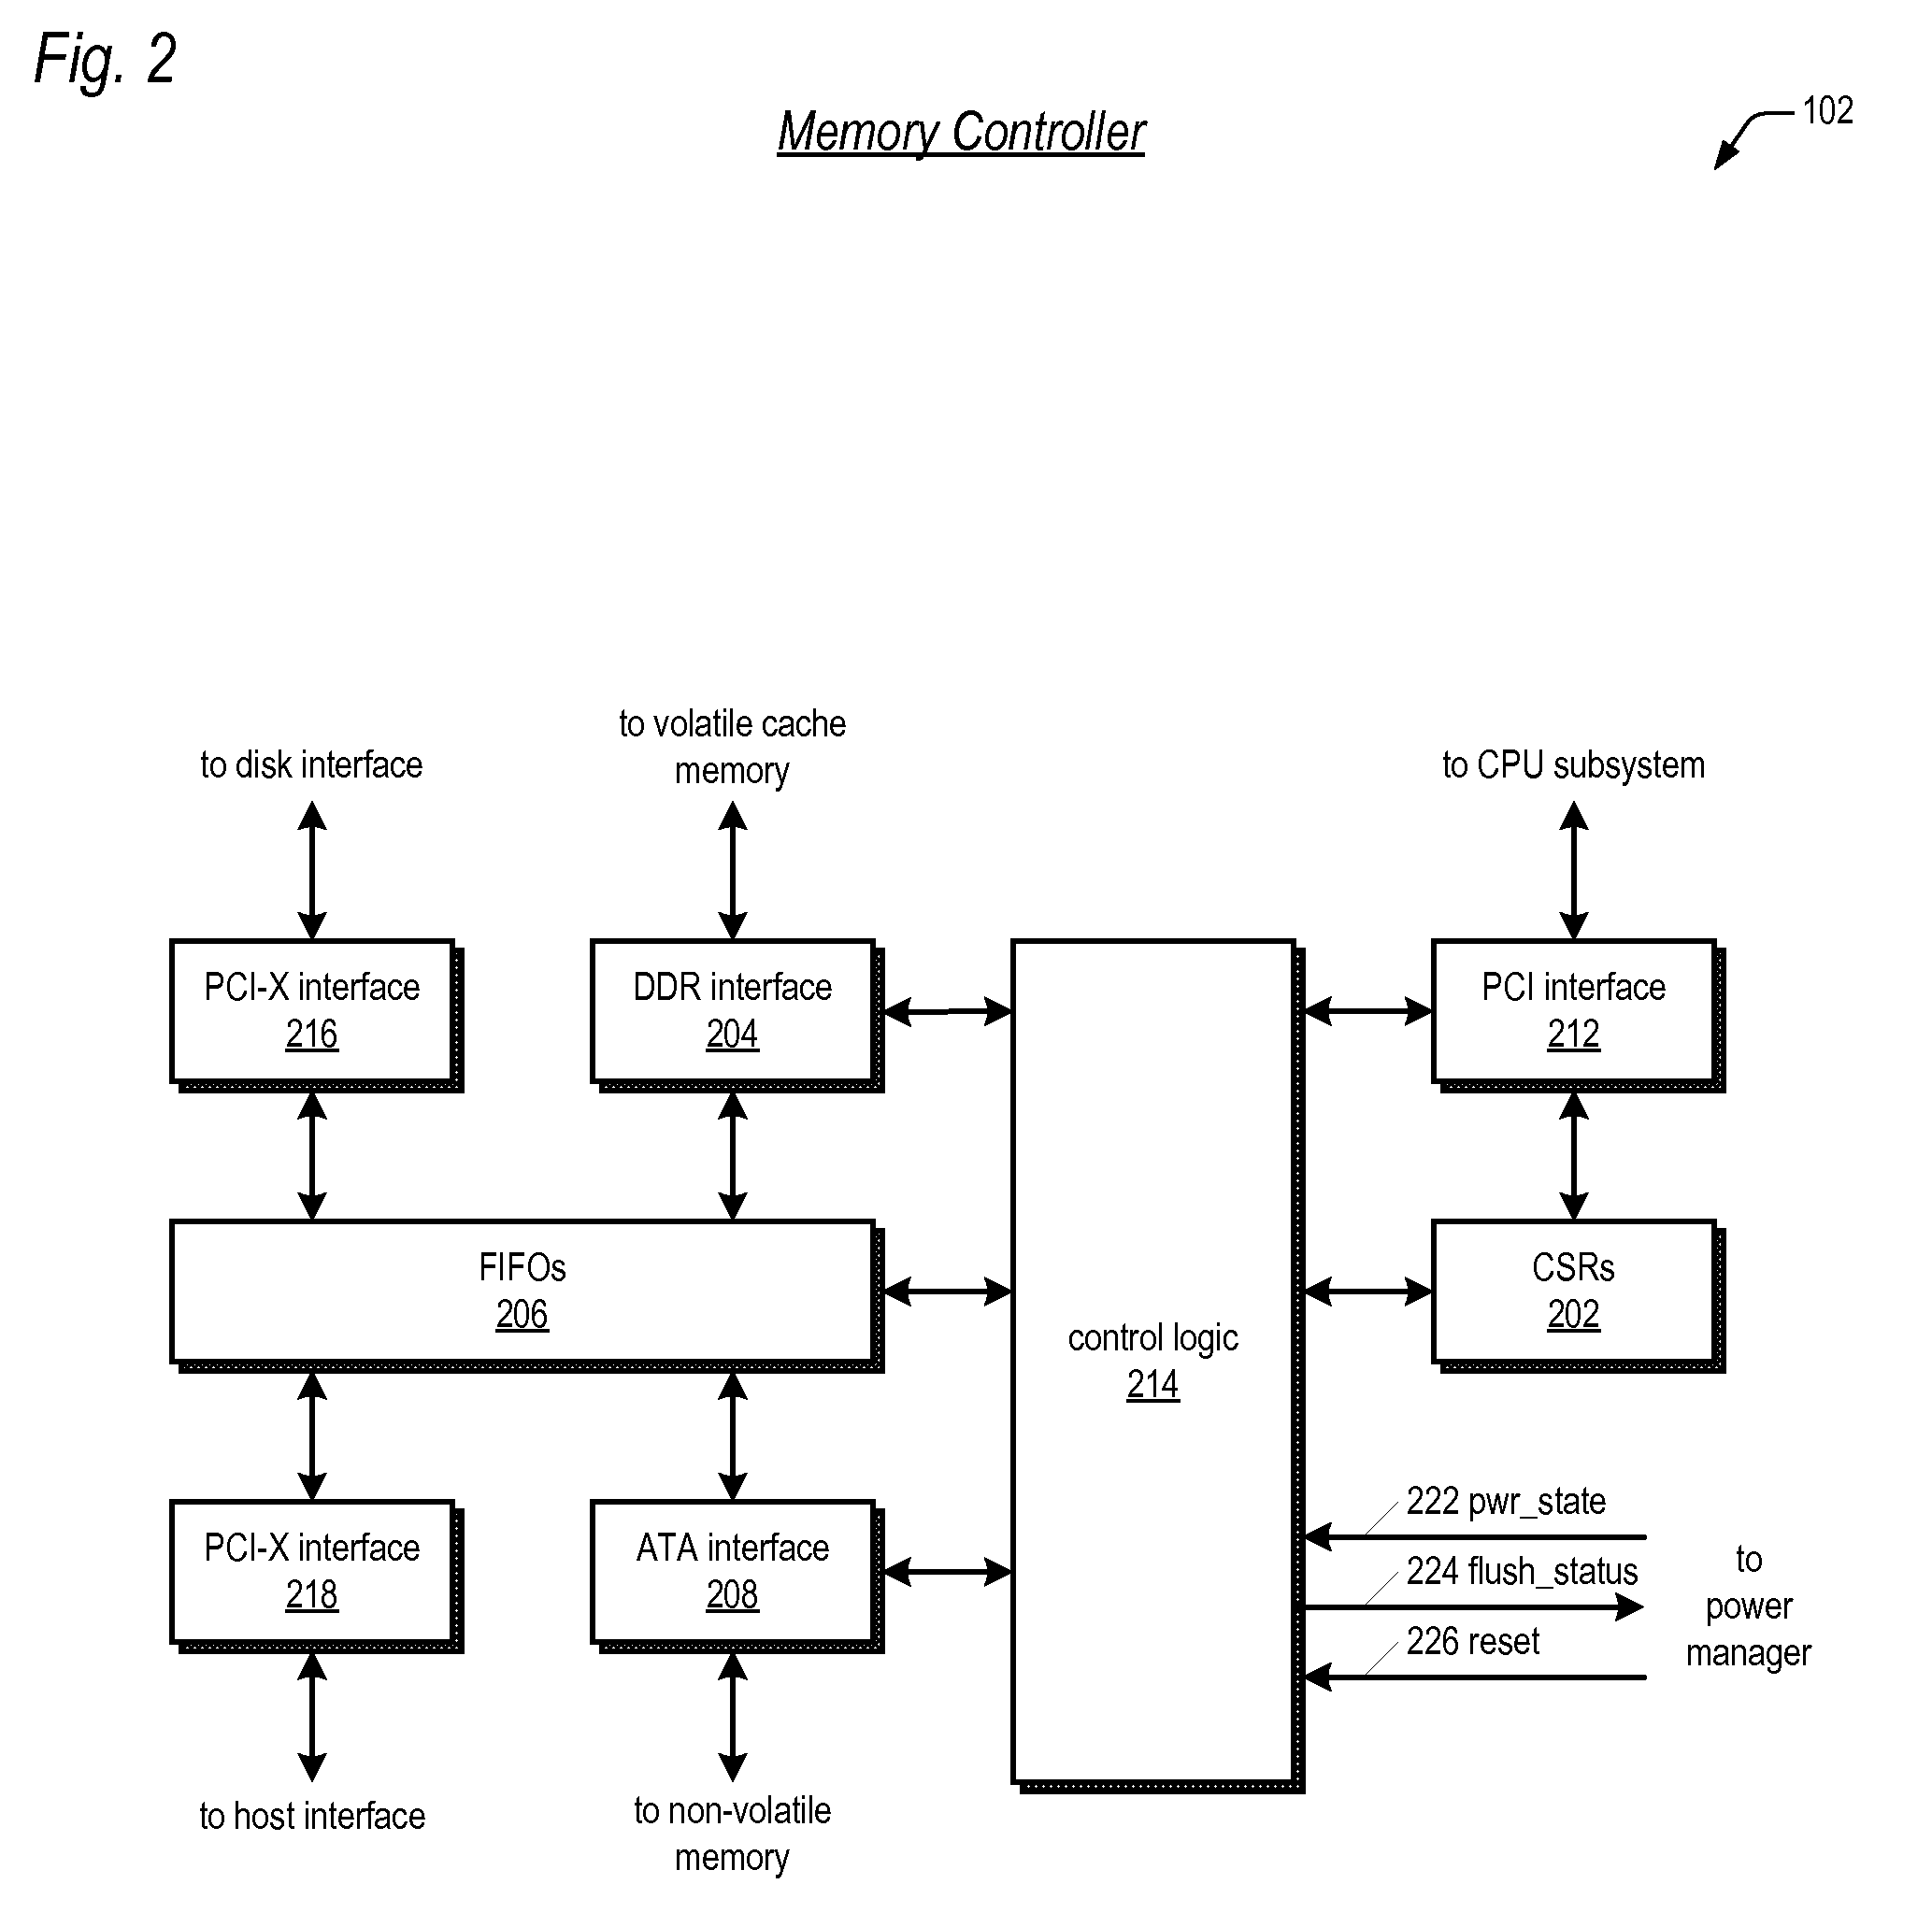 Raid controller using capacitor energy source to flush volatile cache data to non-volatile memory during main power outage